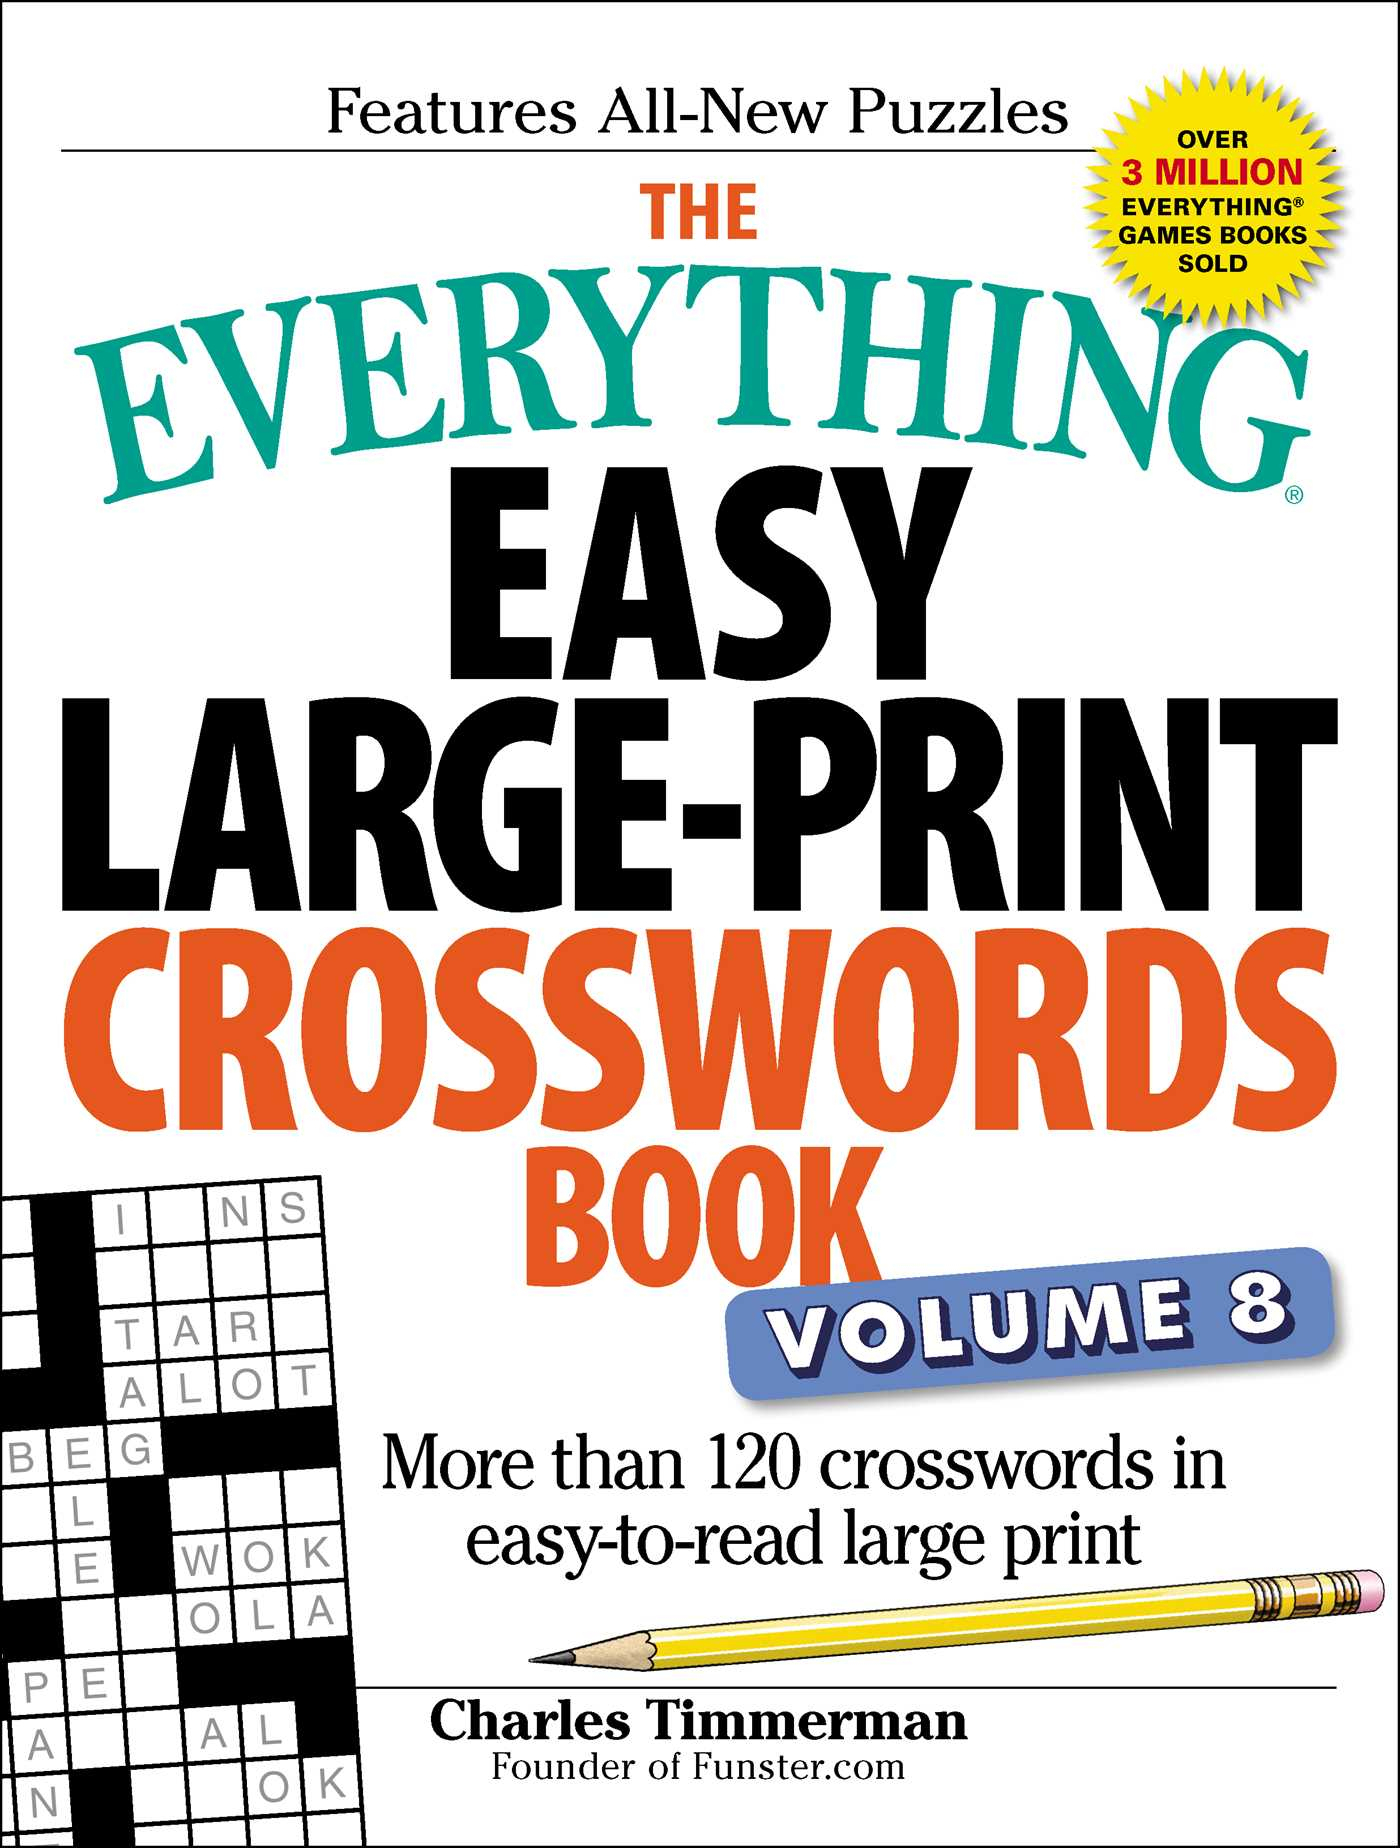 The Everything Easy Large-Print Crosswords Book, Volume 8 | Book - Large Print Crossword Puzzle Dictionary